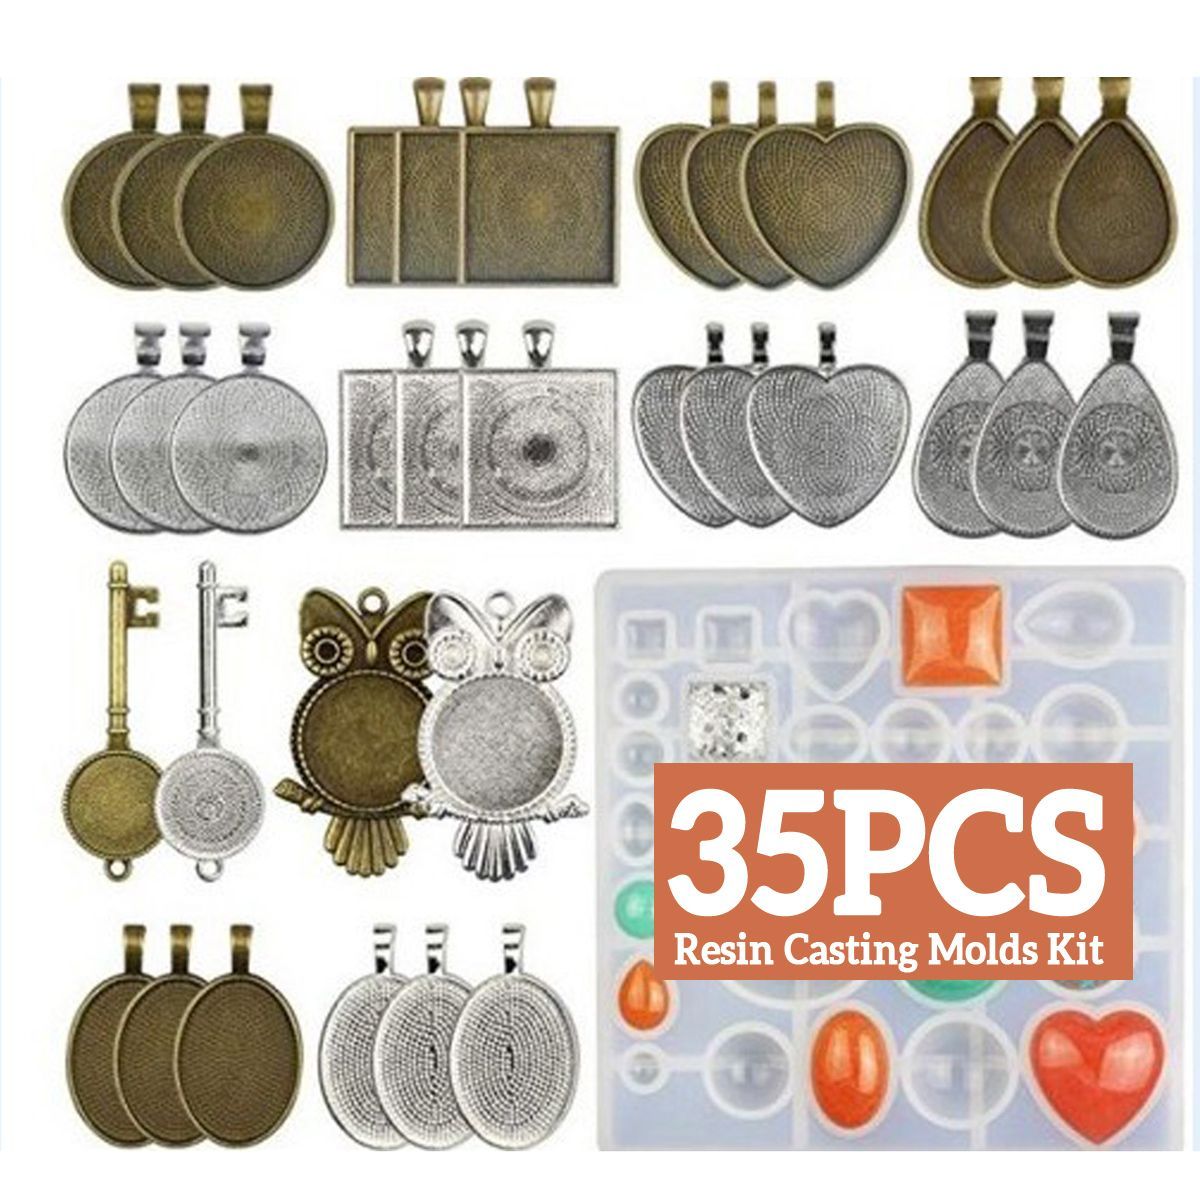 Resin-Casting-Molds-Kit-Silicone-DIY-Mold-Jewelry-Pendant-Mould-Making-Craft-Set-1752669